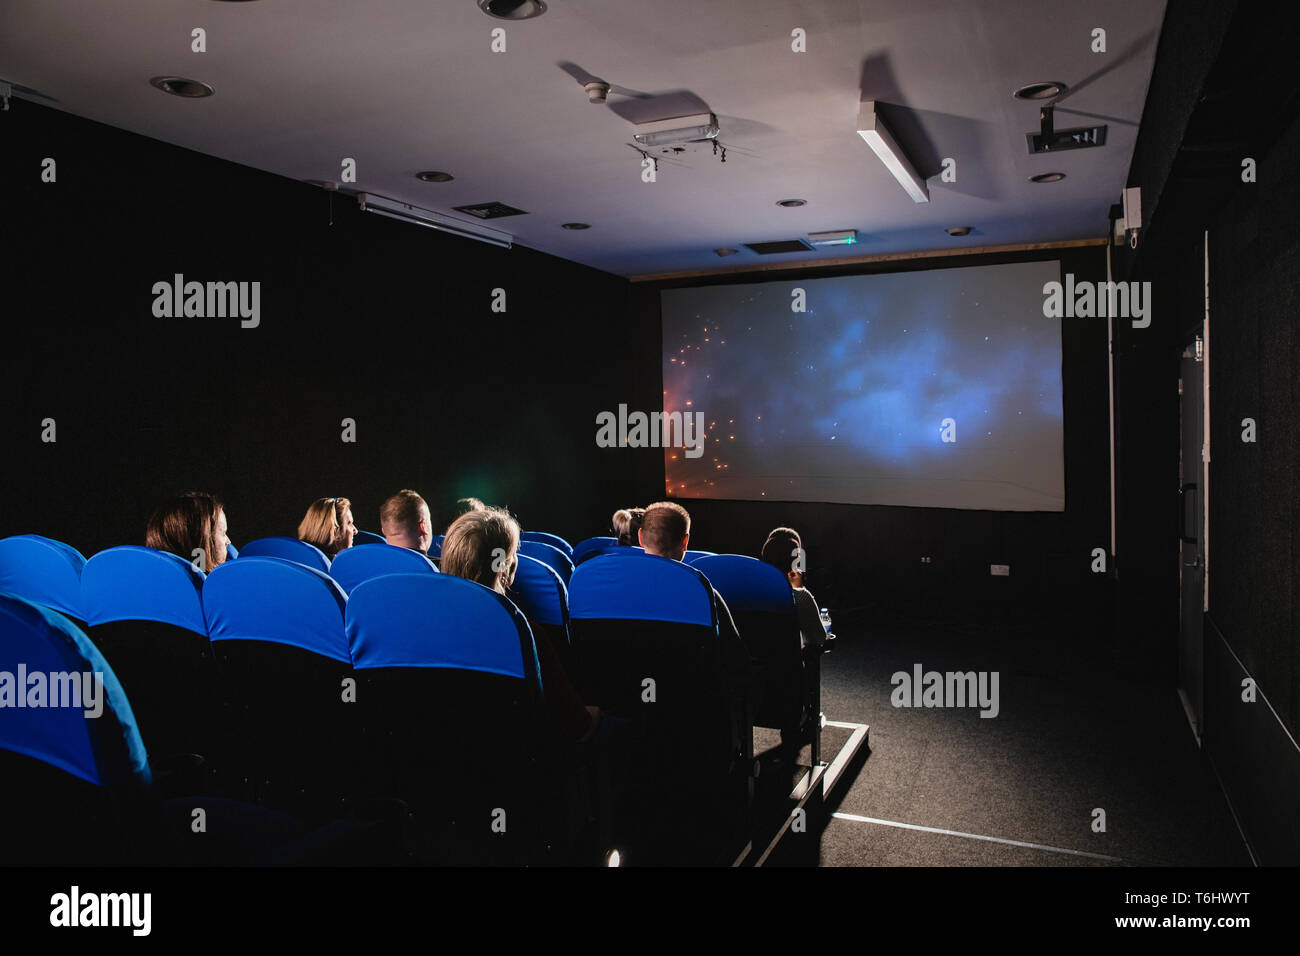 A rear view shot of a movie theater, unrecognizable people can be seen sitting together in blue seats in a row infront of the projection screen. Stock Photo